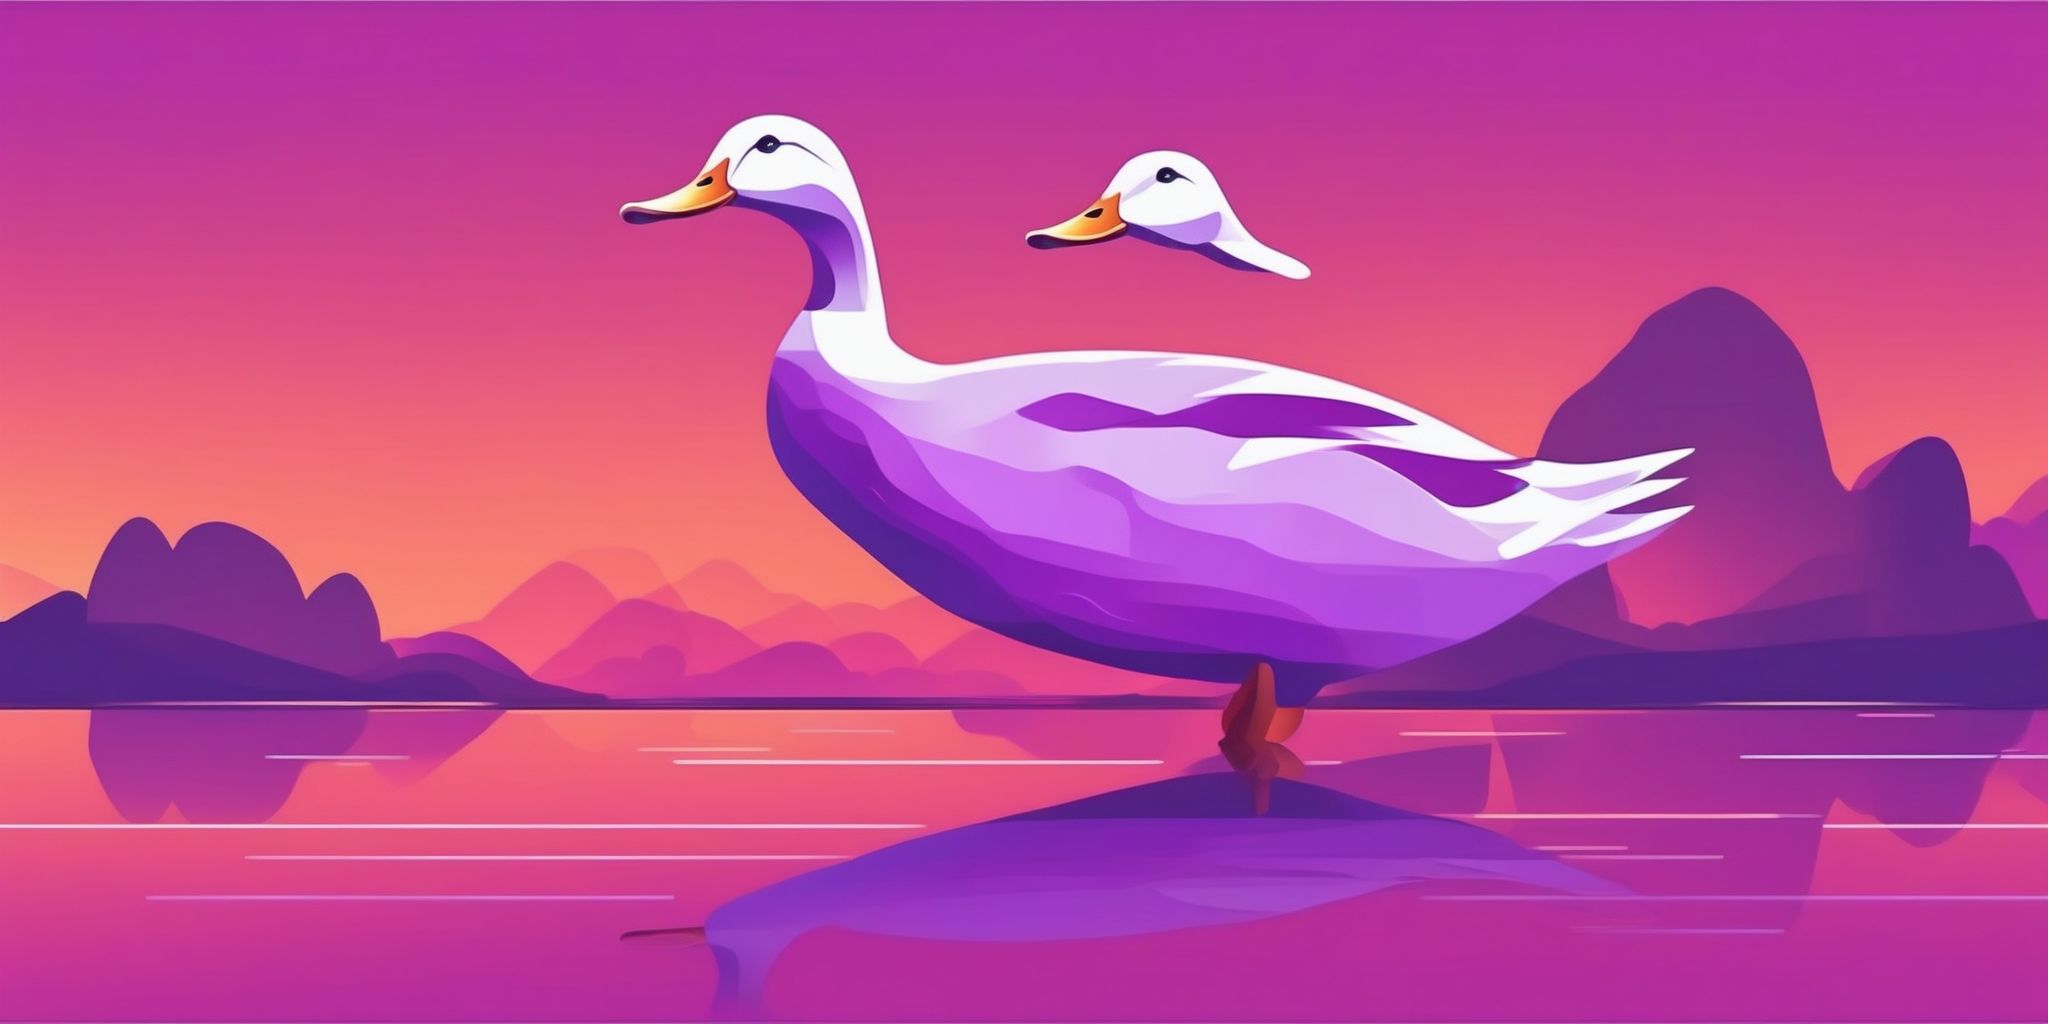 Duck in flat illustration style, colorful purple gradient colors